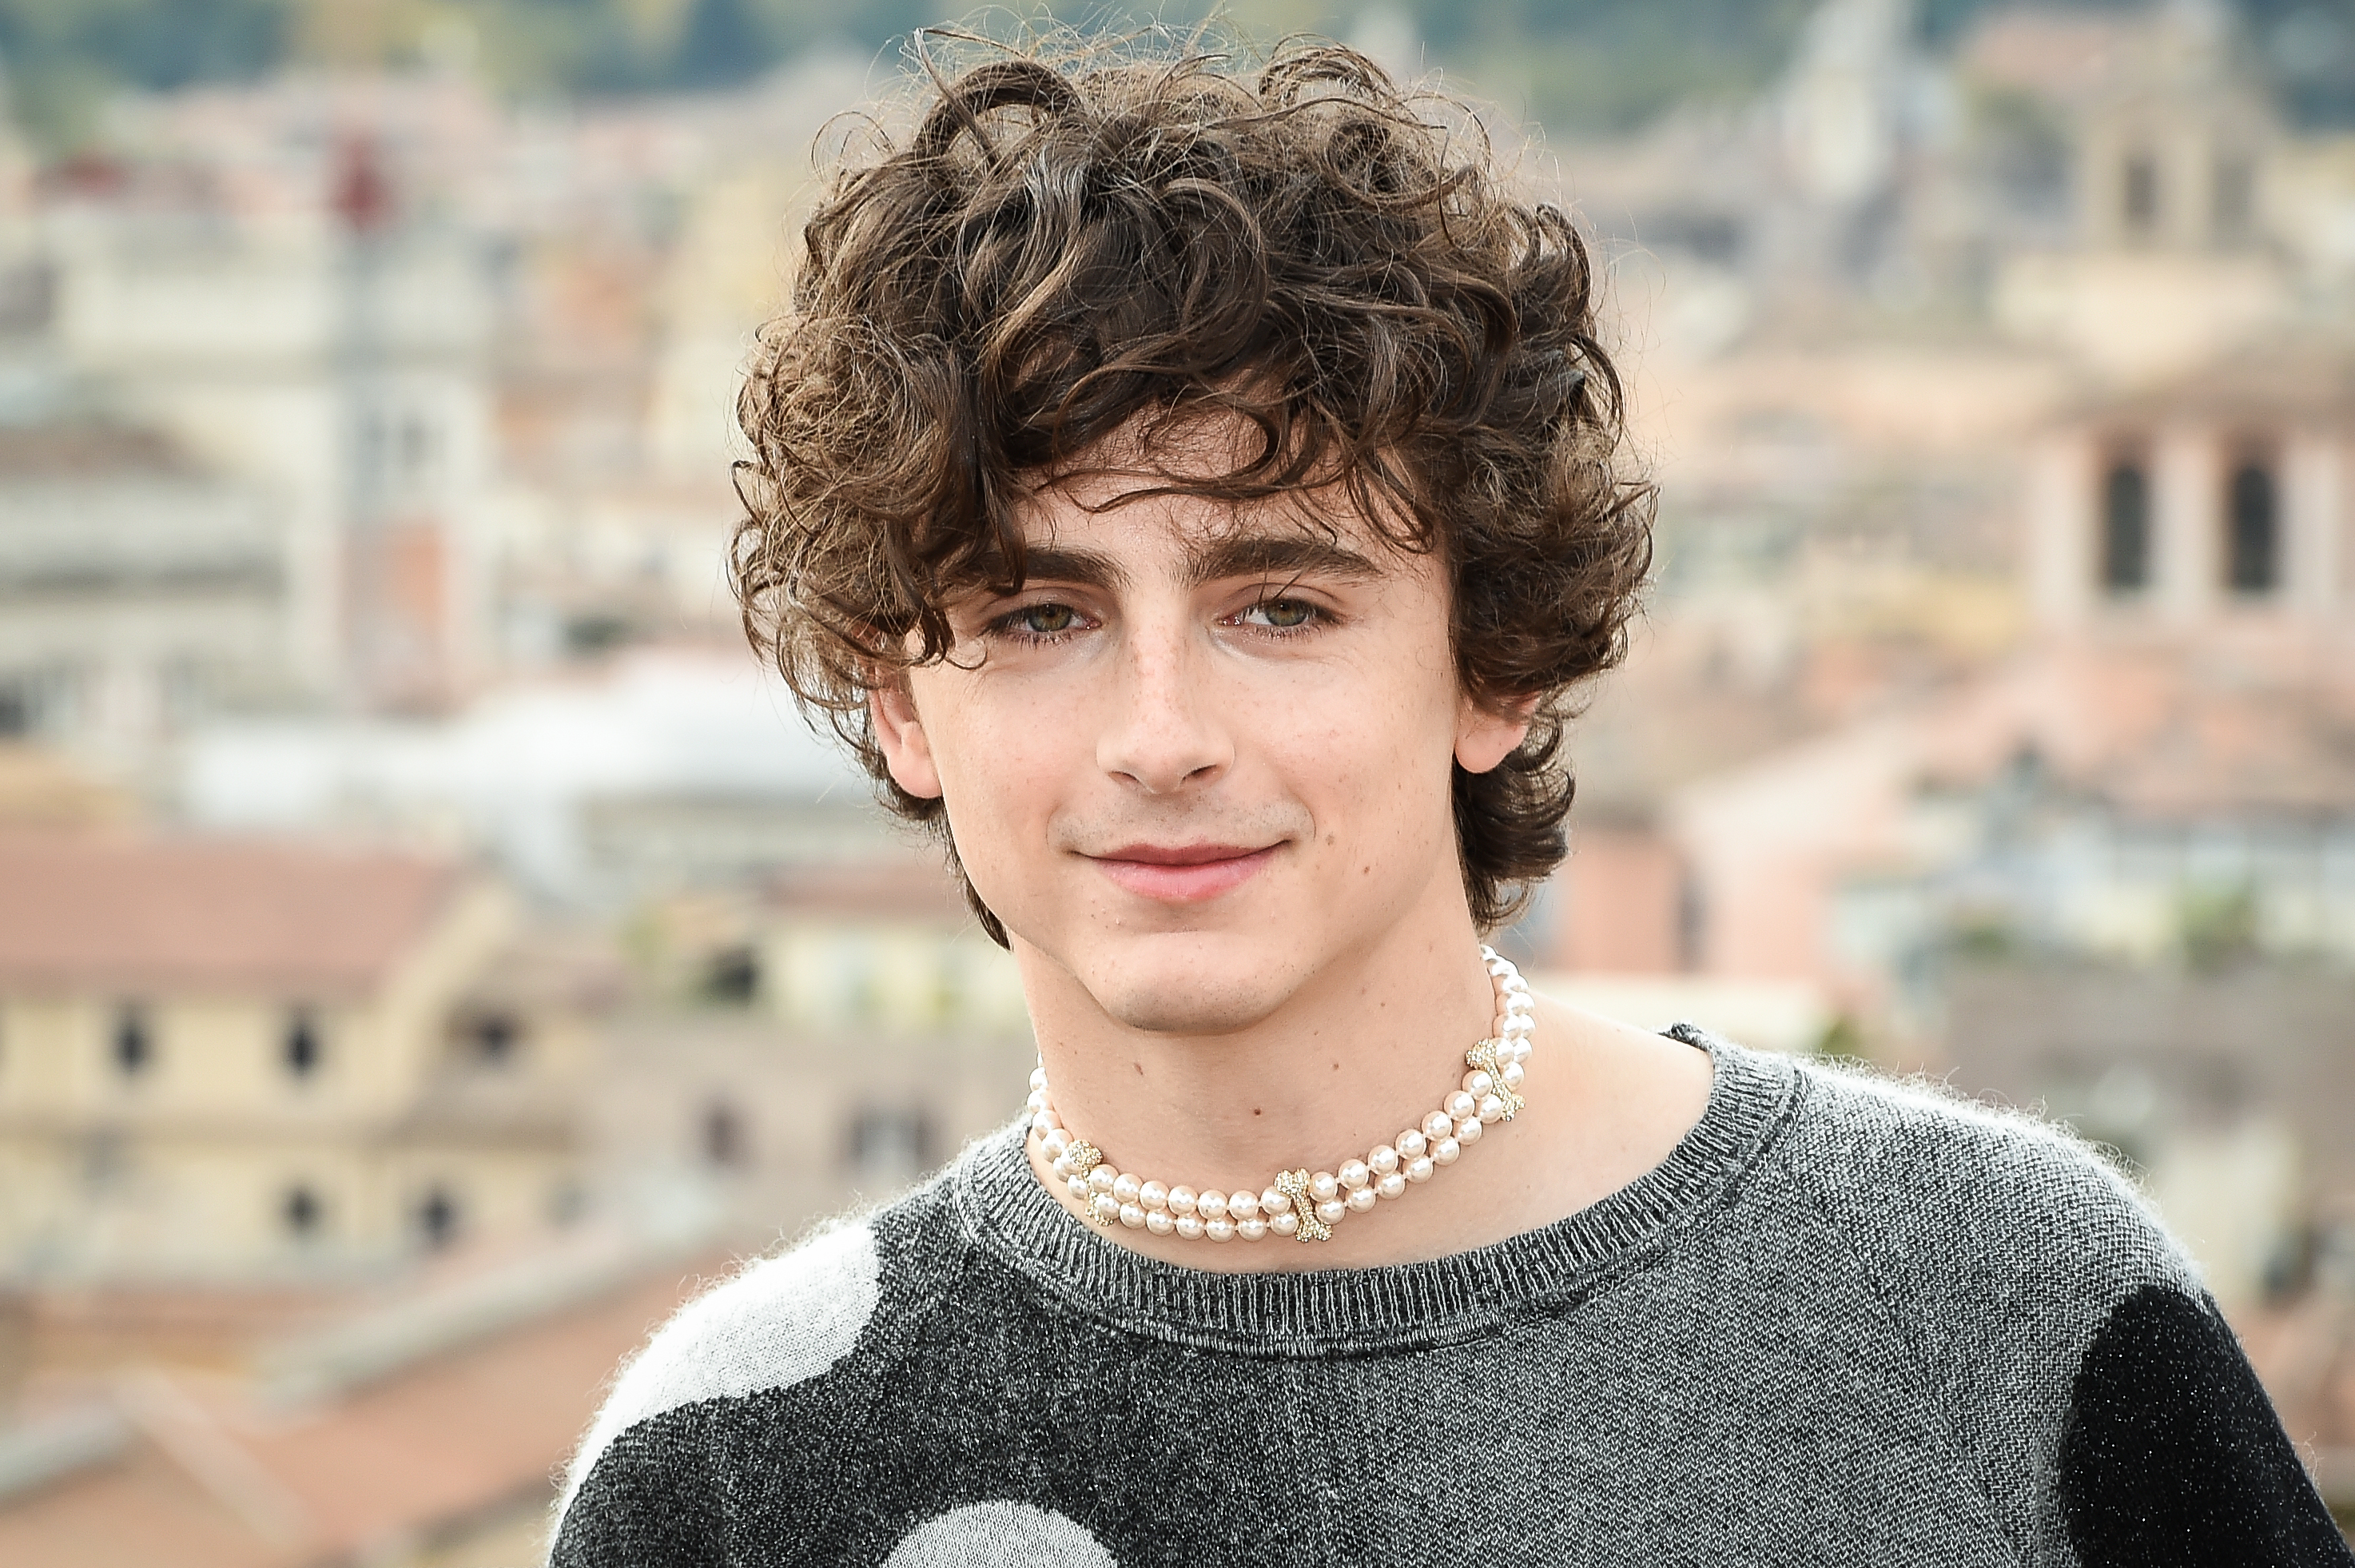 Timothee Chalamet Casual Curly Hairstyle - Hairstyle Story